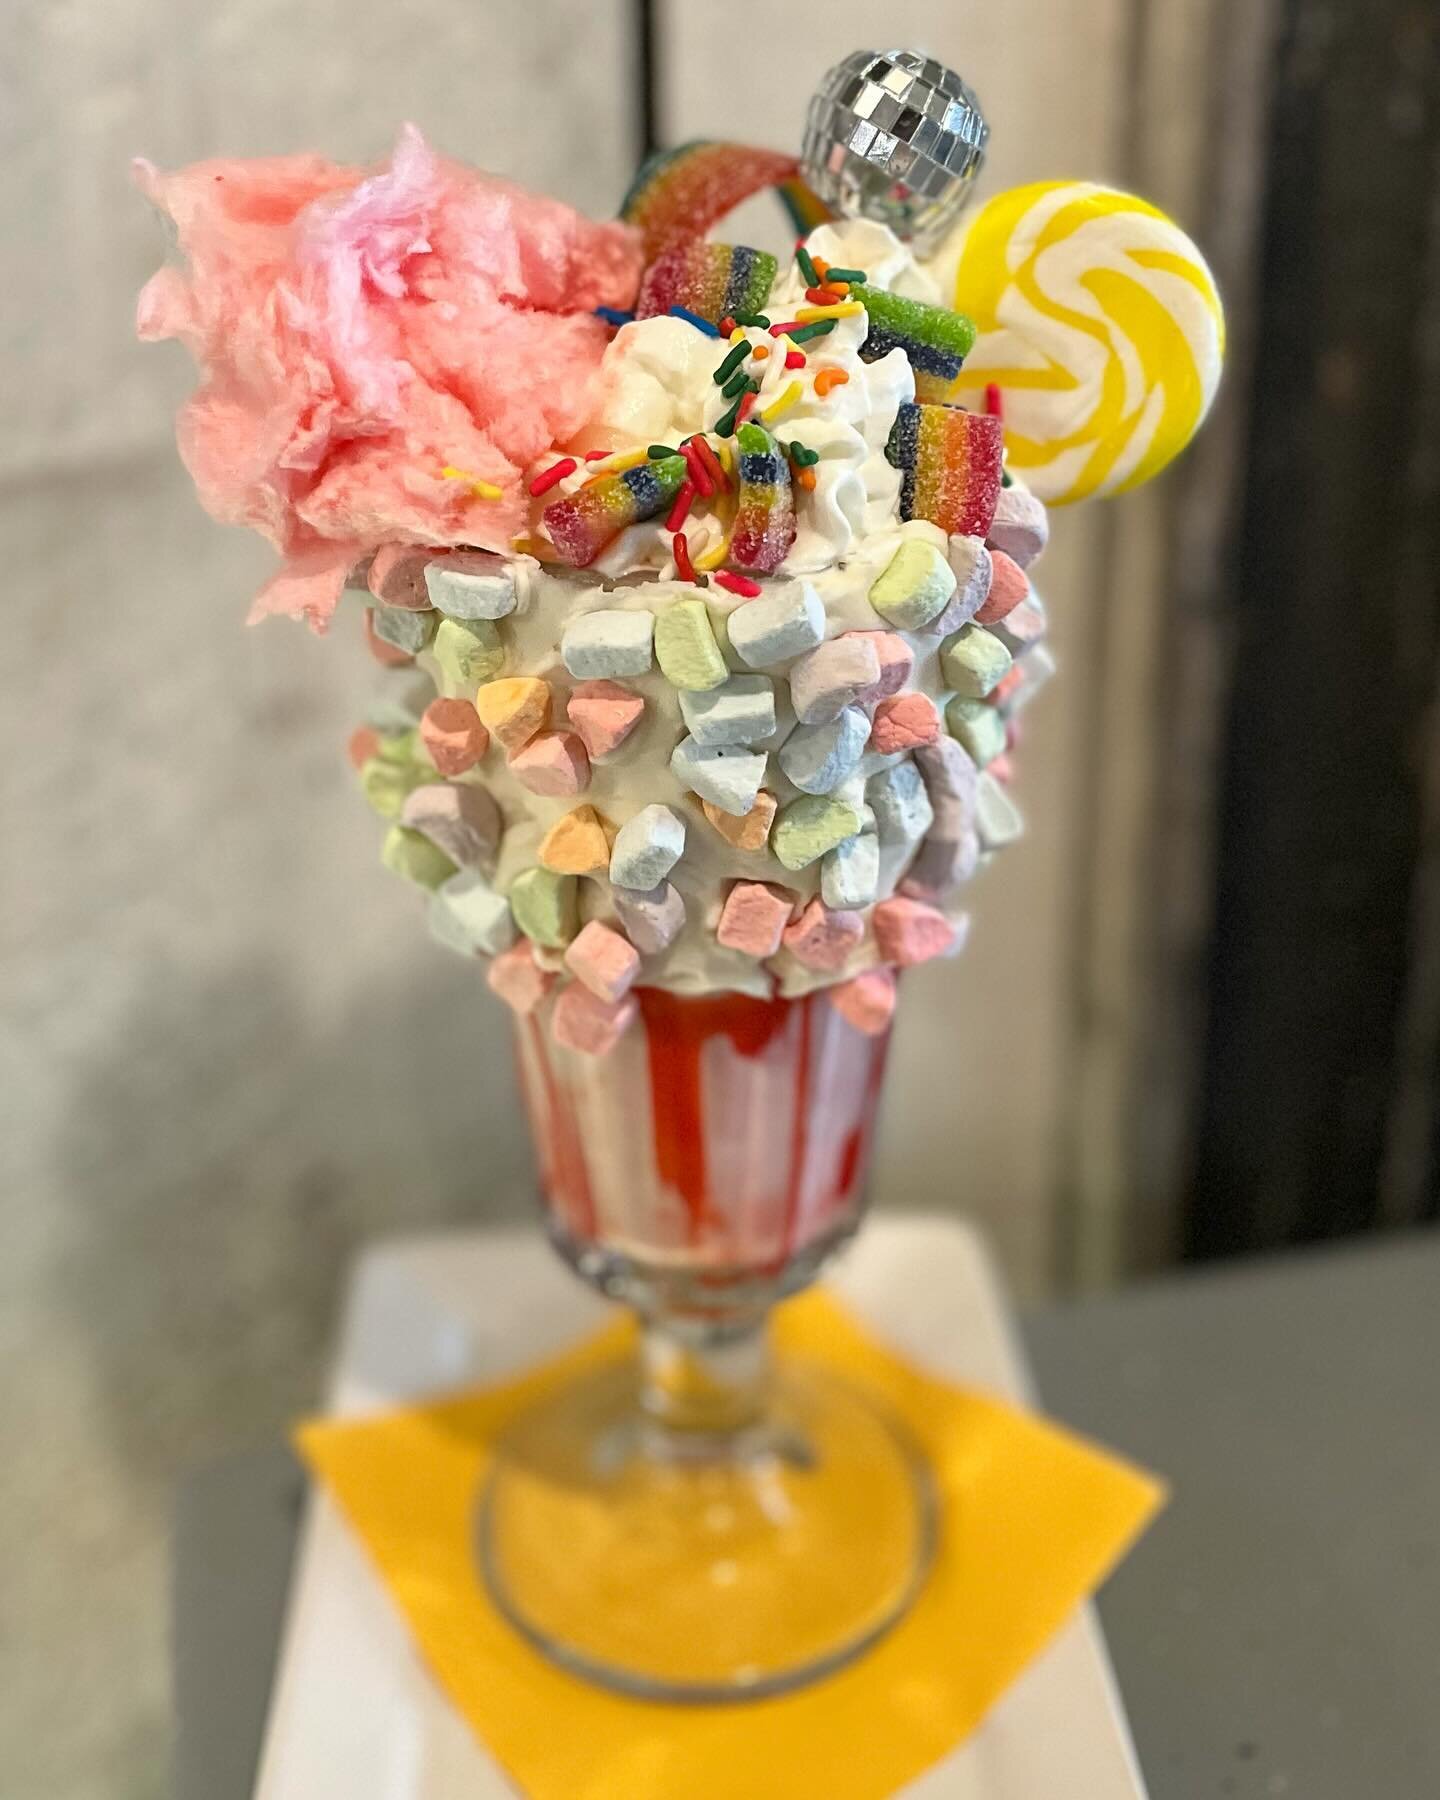 Beat the cold with our spring is here creation! It&rsquo;s Sunshine and Rainbows Amazing Shake time at #santafeburgerbar #amazingshake #rosendaleny #ulstercountyny #upstatedesserts #leaveroomfordessert #springsunshine #springrainbow #aprilshowers #cr